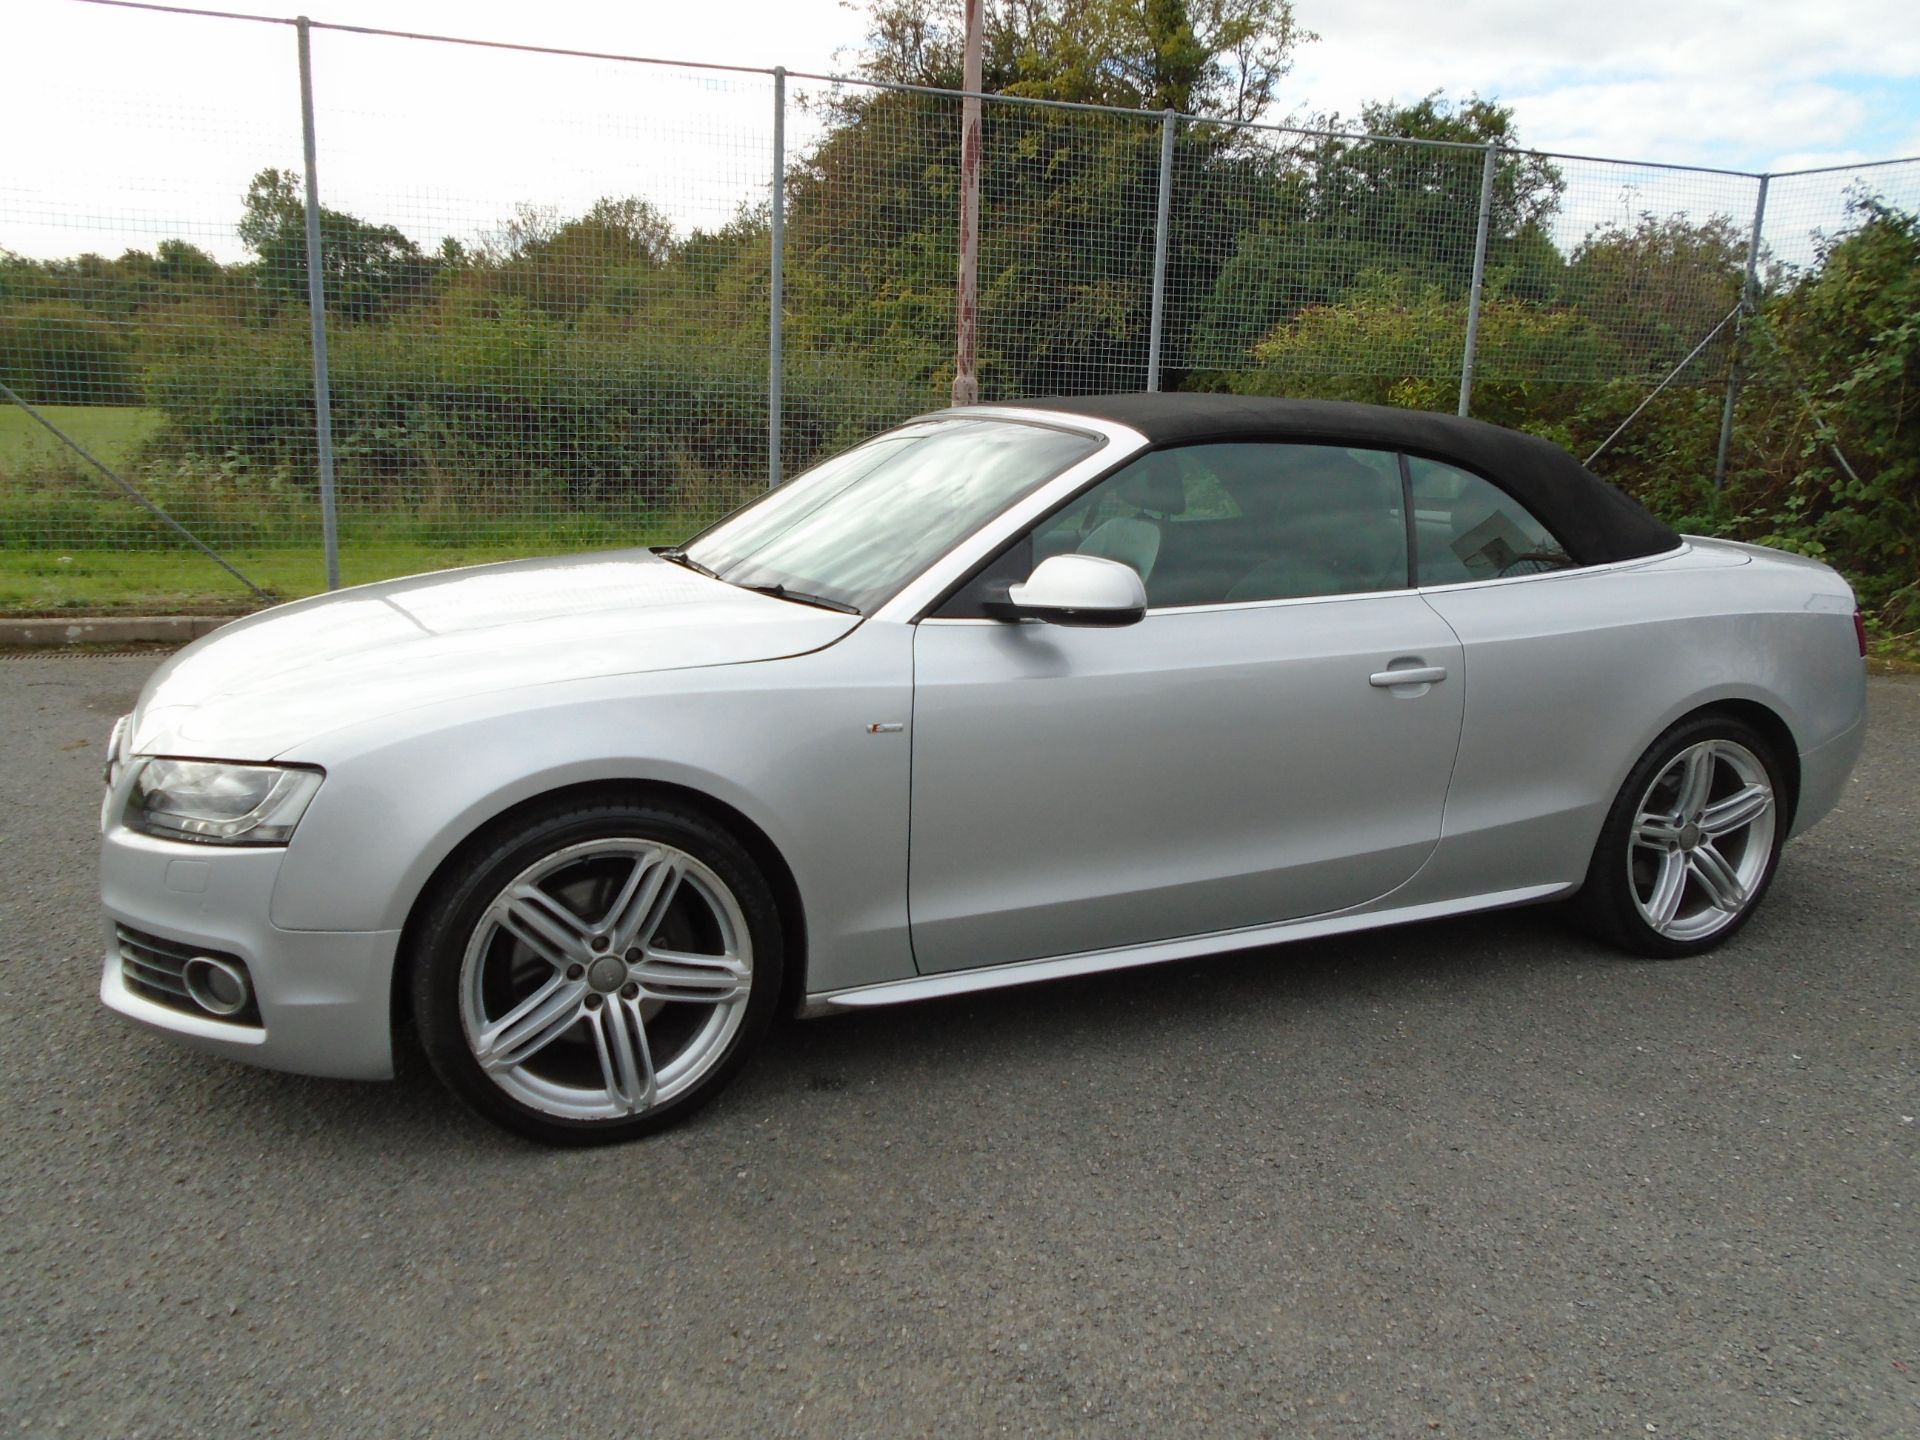 2011 AUDI A5 S LINE TFSI CVT SILVER CONVERTIBLE , STEERING WHEEL WITH LUDING PADDLE *NO VAT*